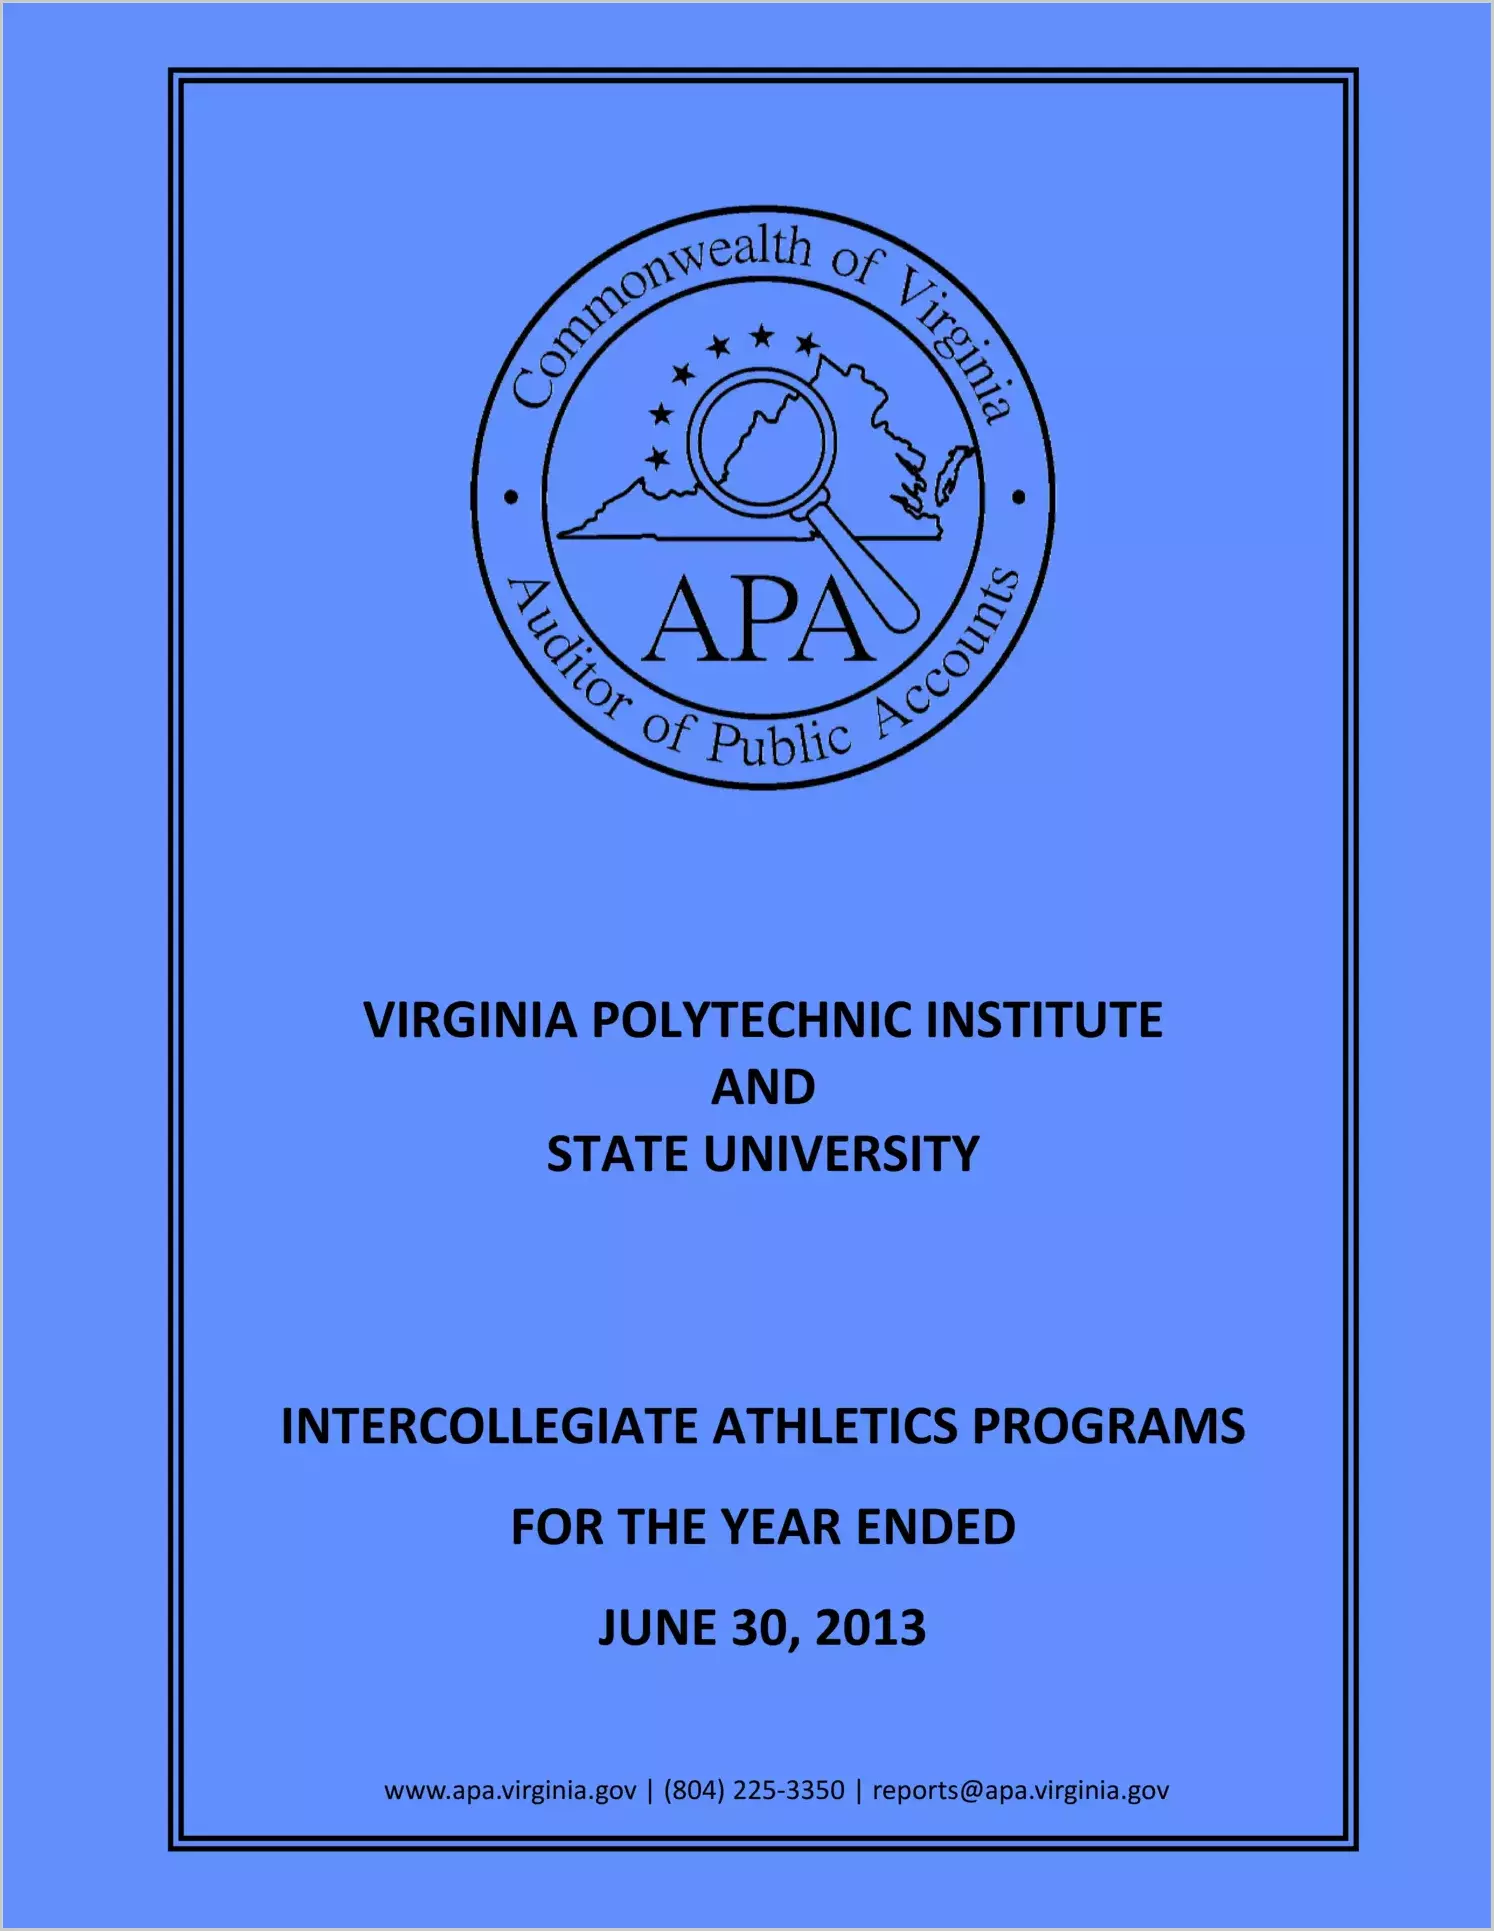 Virginia Polytechnic Institute and State University Intercollegiate Athletic Programs for the year ended June 30, 2013